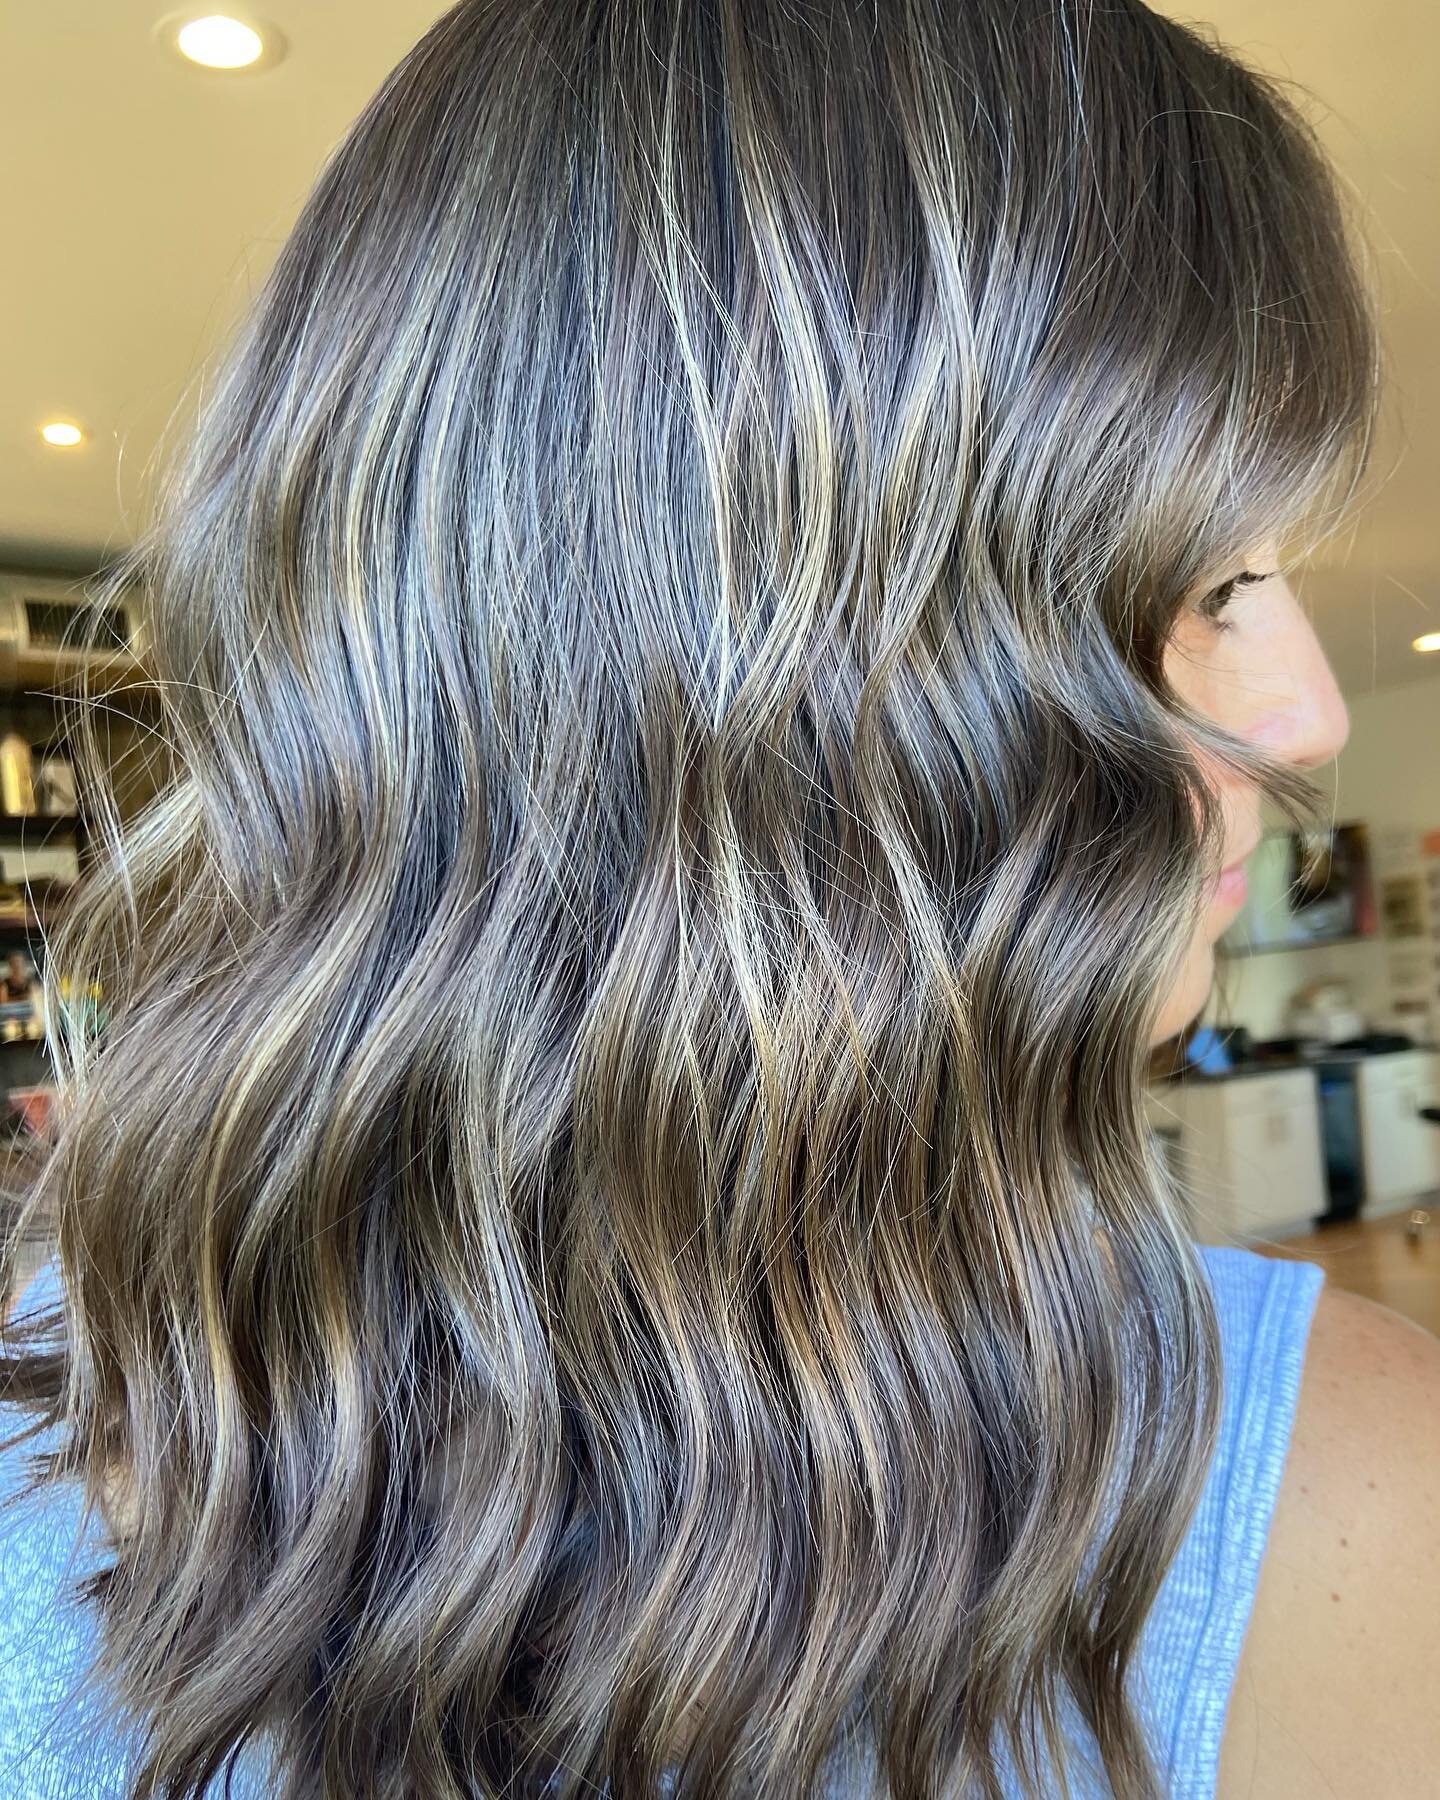 ✨When you want to keep her brunette &amp; give her pops of color that&rsquo;s effortless and fun! ✨⠀
⠀
Schedule a foil at crownsalonsaratoga.com with anyone of our amazing talented stylists. ⠀
⠀
⠀
⠀
⠀
⠀⠀⠀⠀⠀⠀⠀⠀⠀⠀⠀
#Saratogahair #Saratogahairstylist #h